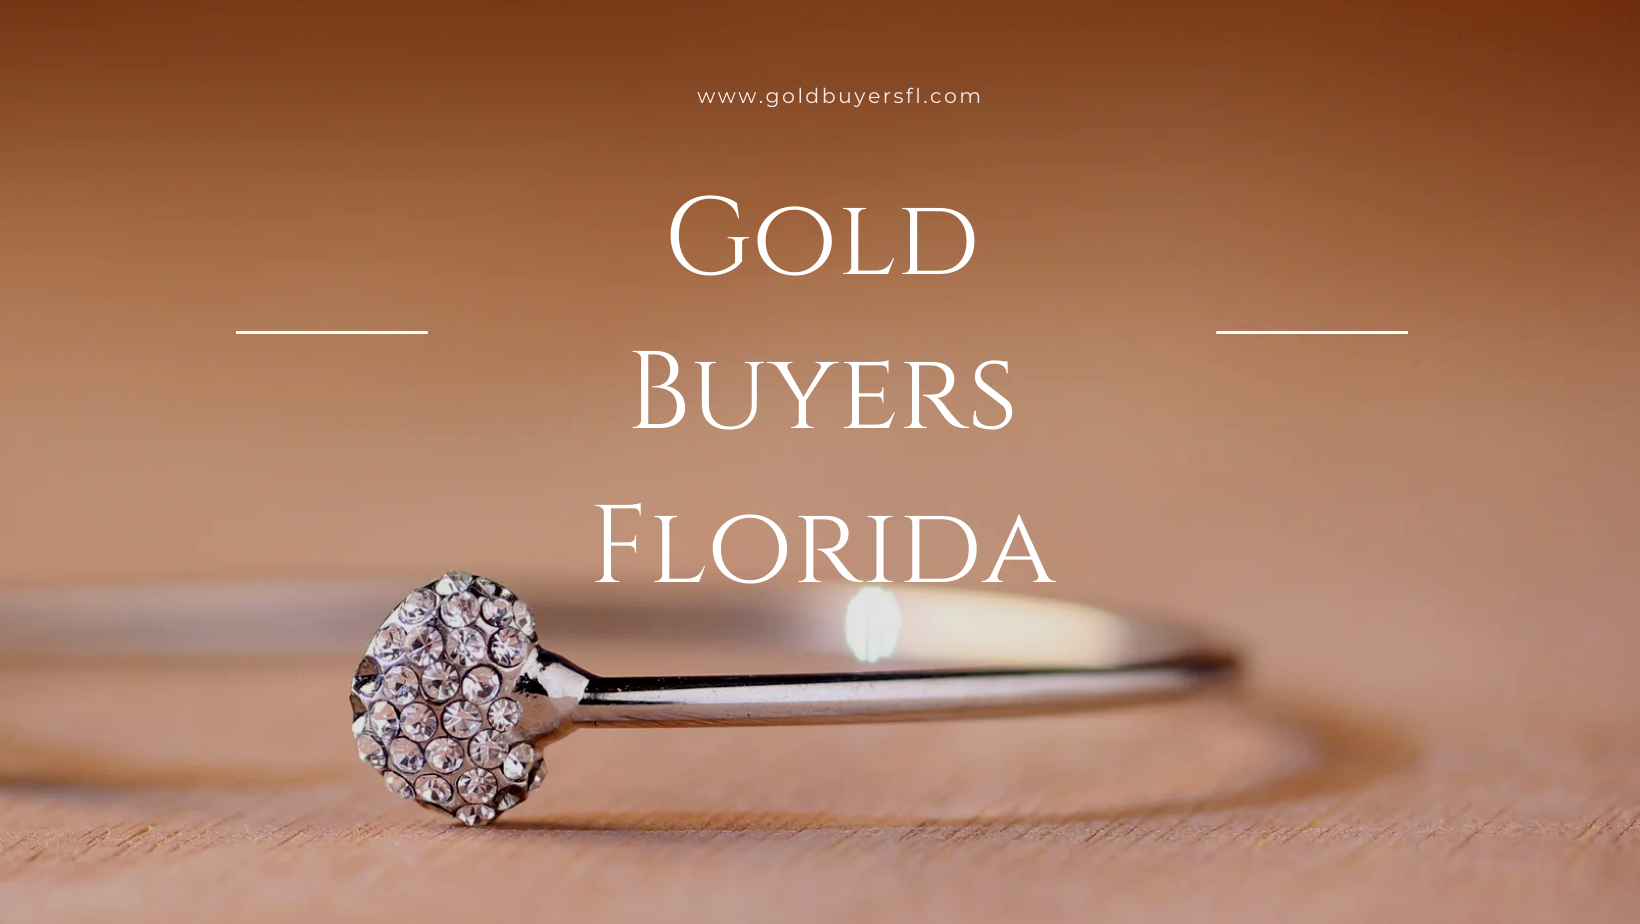 Gold Buyers Florida - a Trusted Partner in Gold, Silver, and Estate Jewelry Sales